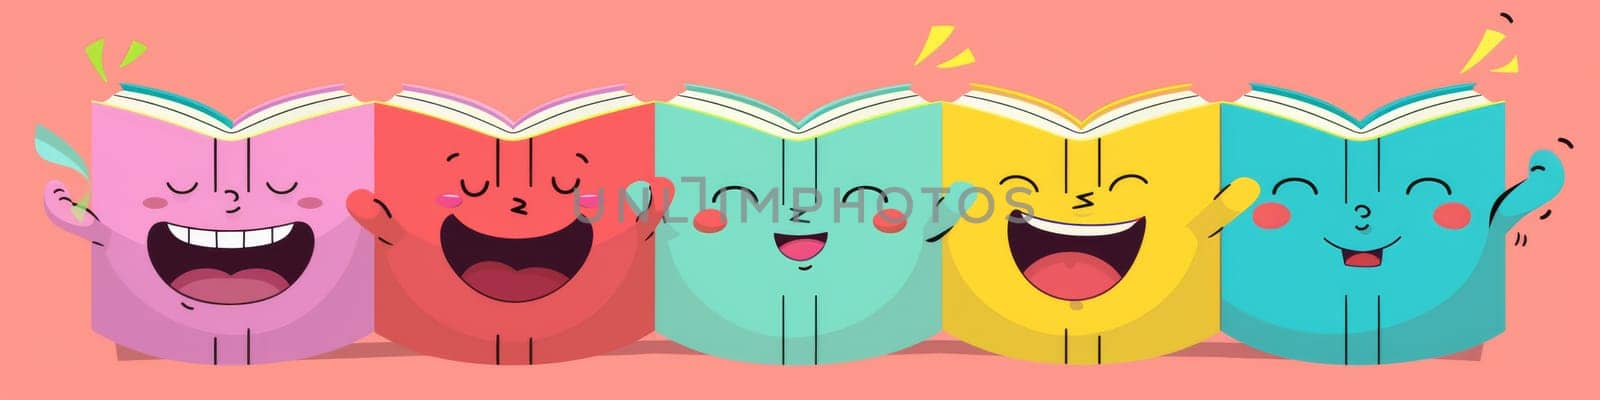 Row of colorful, smiling and laughing books as banner by Kadula